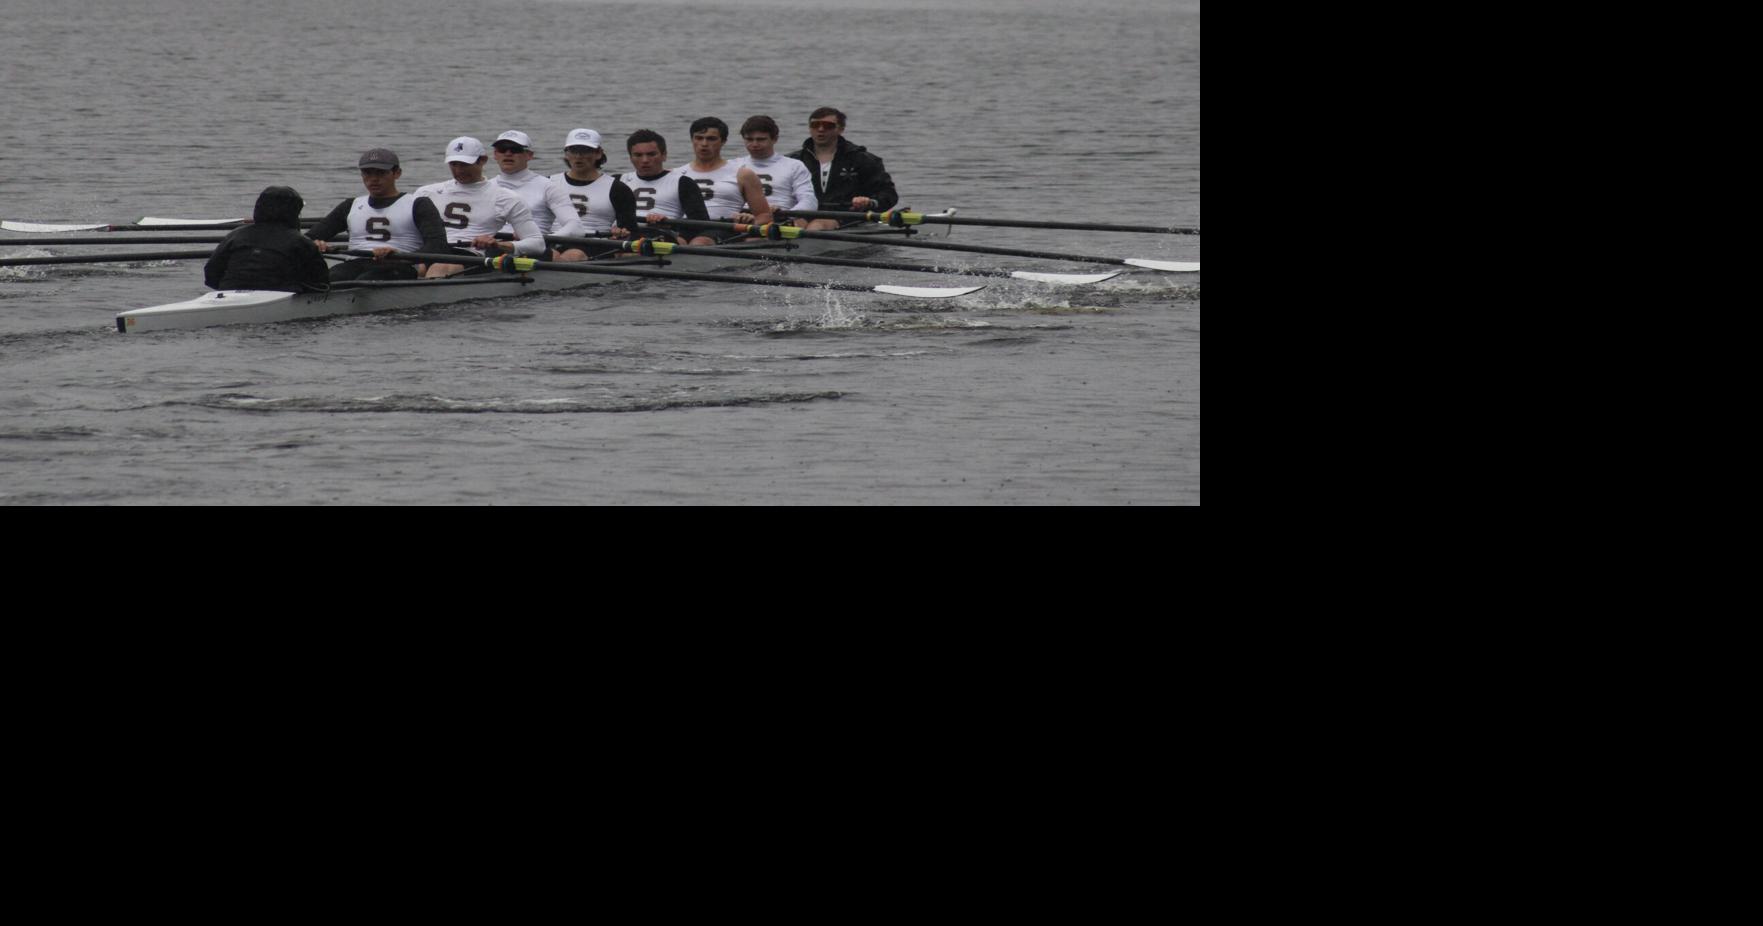 Crew: Stonington boys and girls first eights have good day on the Mystic River